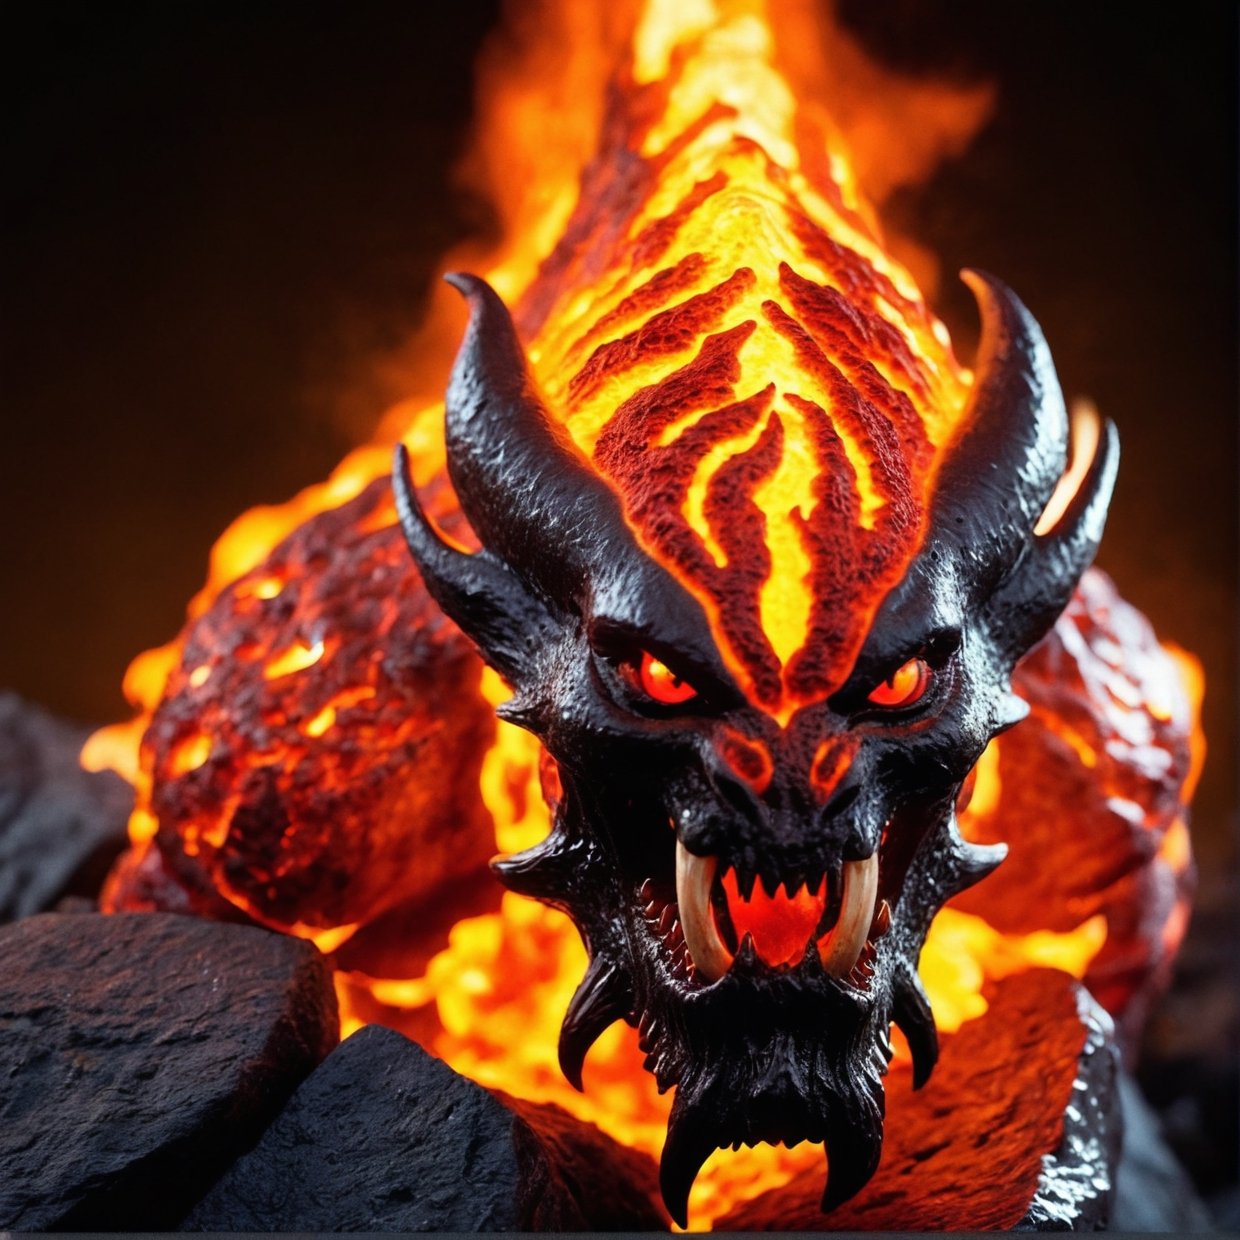 (best quality,4k,8k,highres,masterpiece:1.2),ultra-detailed,realistic,sculptural,dark and fiery,Lava Demon,blazing inferno,ominous presence,giant creature,blackened skin,glowing eyes,fierce expression,sharp claws,long fangs,burning lava flowing from its body,intense heat,smoke and ashes,volcanic rocks,surrounded by flames and magma,destructive power,fiery tendrils,demonic energy,rugged and rough texture,molten lava armor,resembling a mythical creature,emitting a sinister aura,deep red color palette with hints of orange and black,emphasizing the demonic nature of the creature,dramatic lighting with fiery orange and red hues,creating a menacing atmosphere.,background